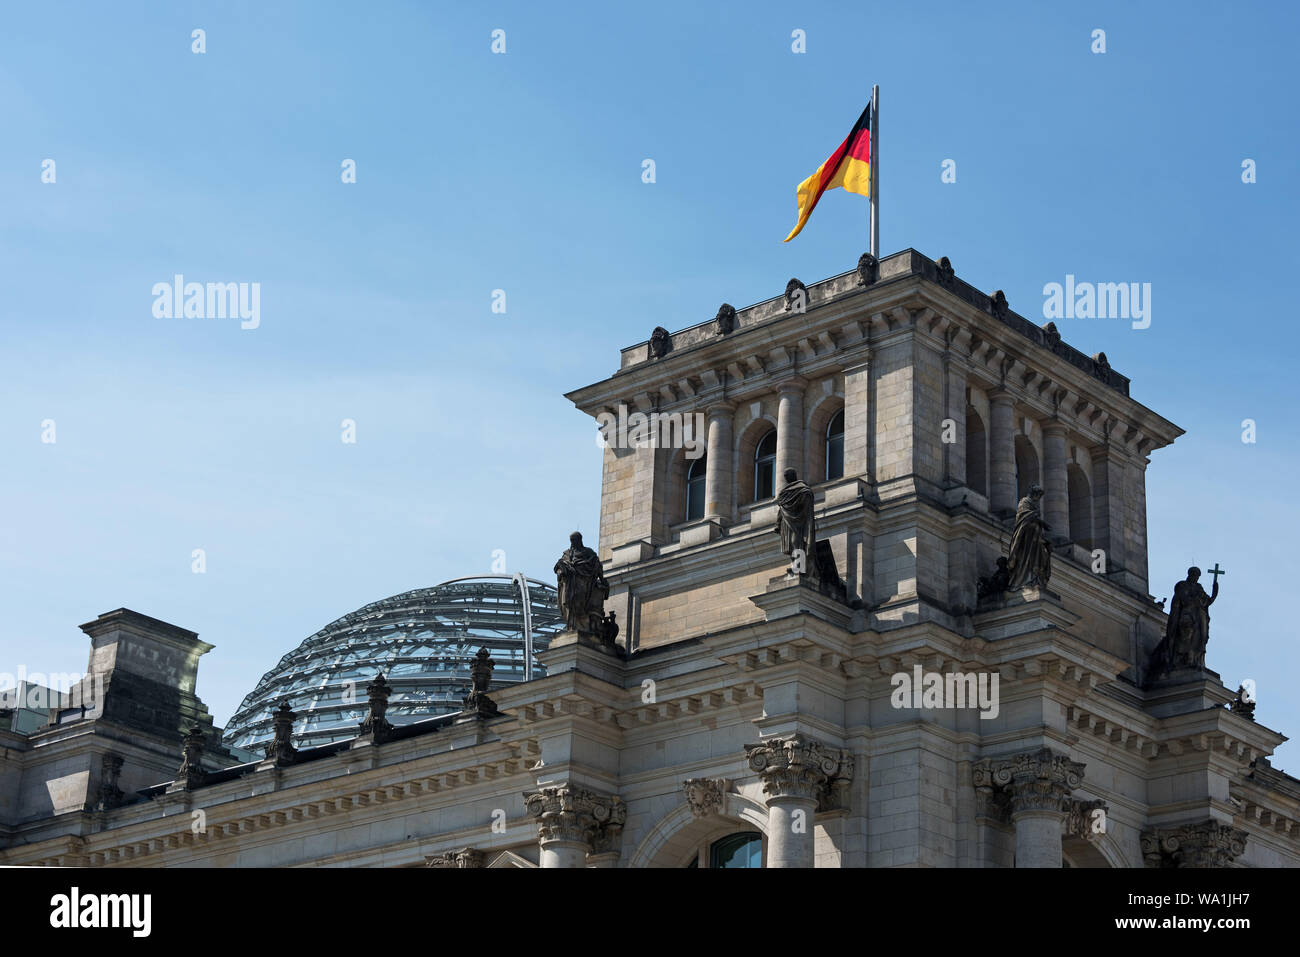 View of the Reichstag and dome from the Spree River, Berlin, Germany Stock Photo